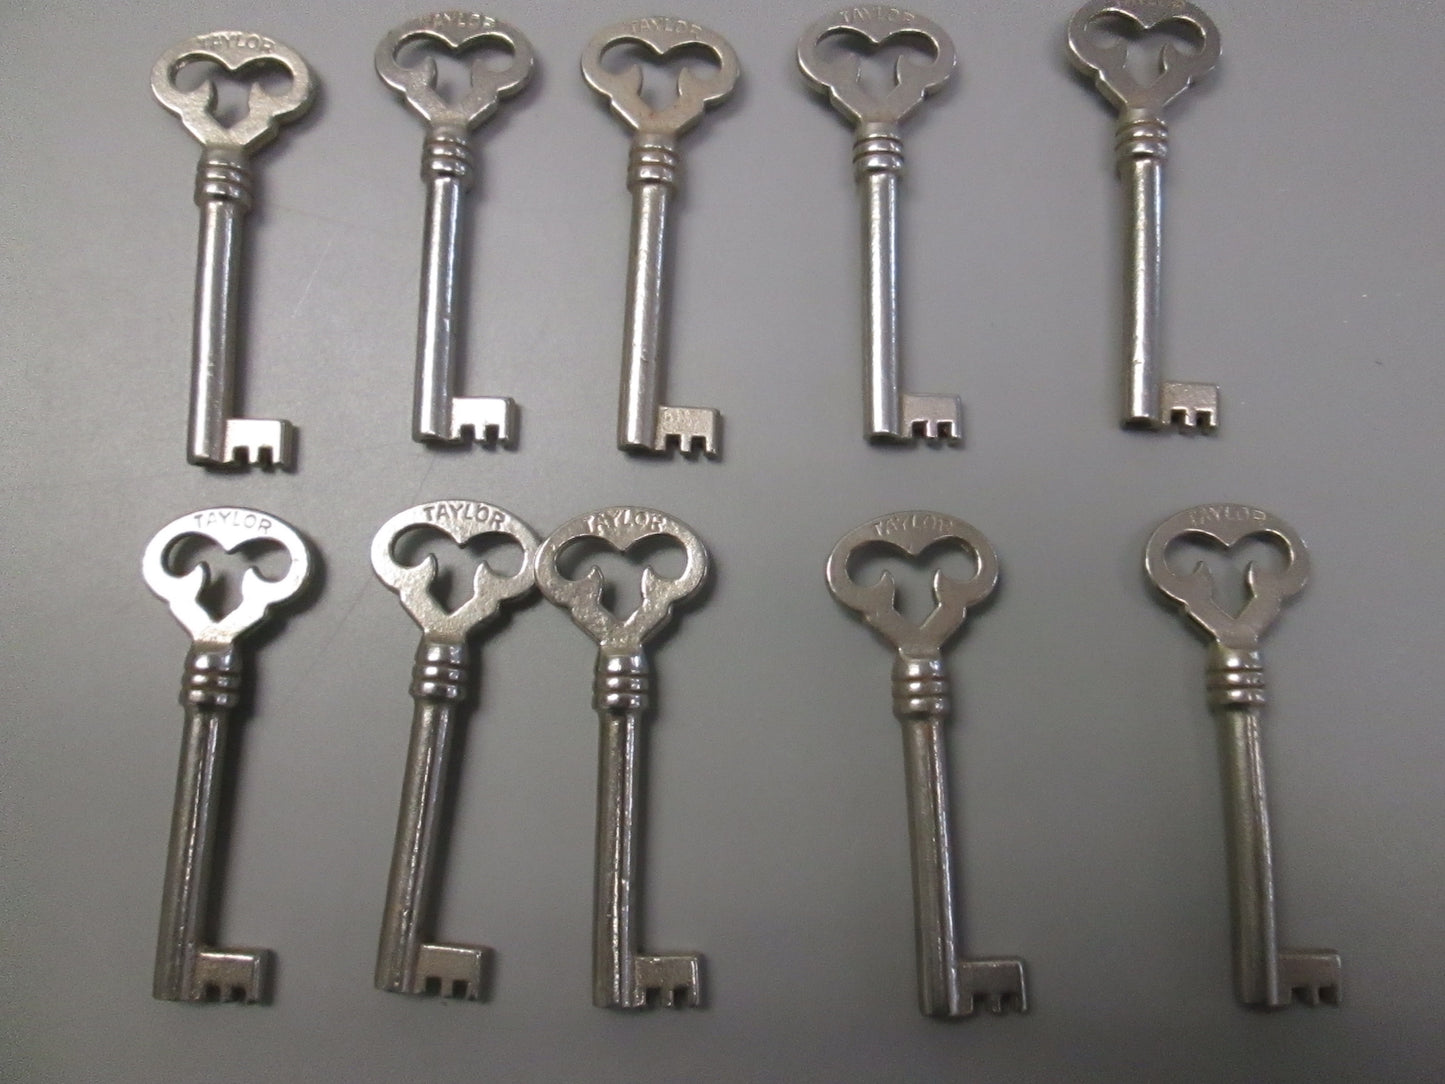 Taylor 635 Drilled Furniture Key Lot of 10